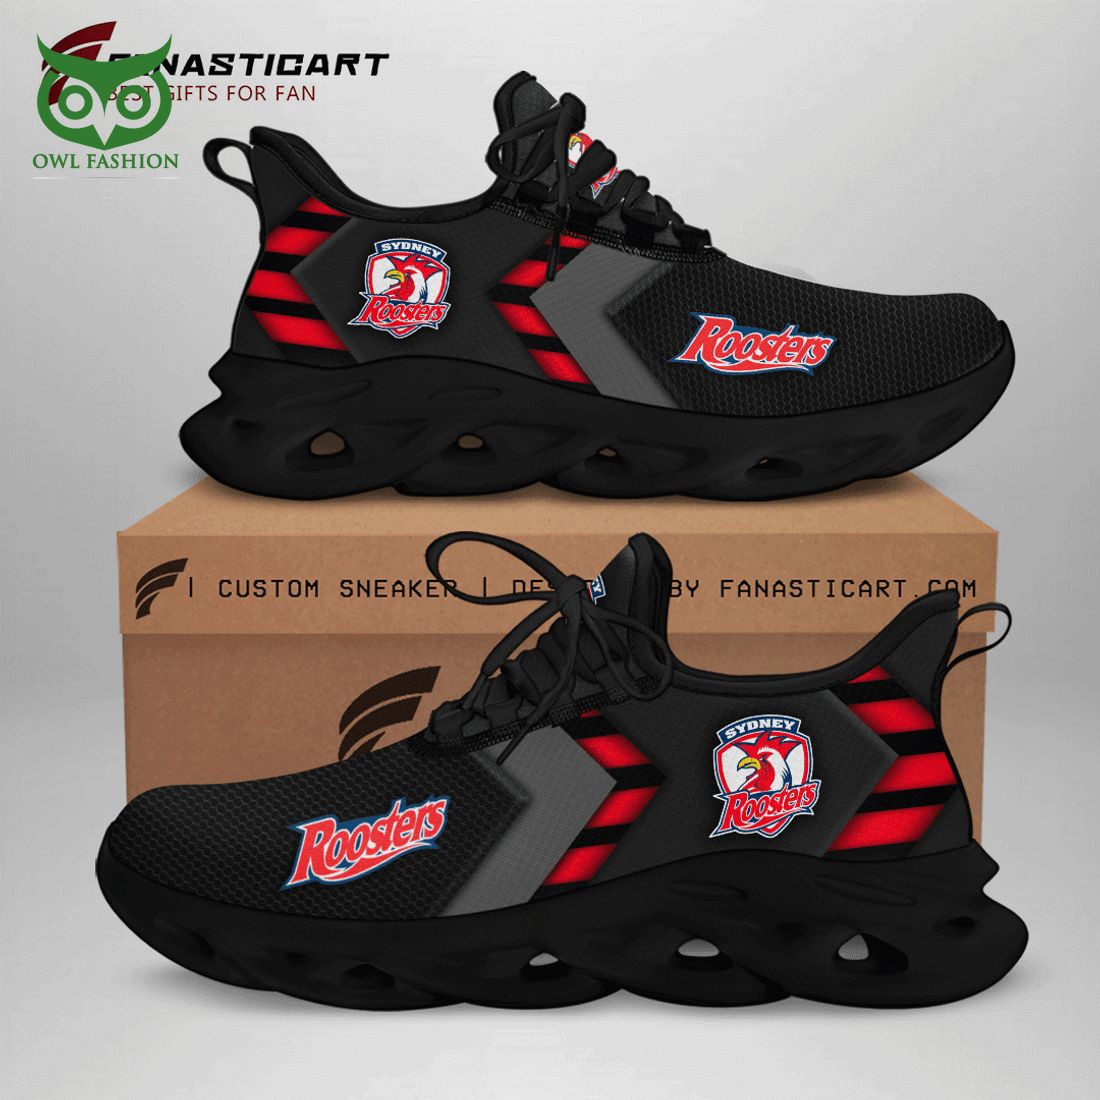 sydney roosters nrl max soul shoes 1 ZtCkC